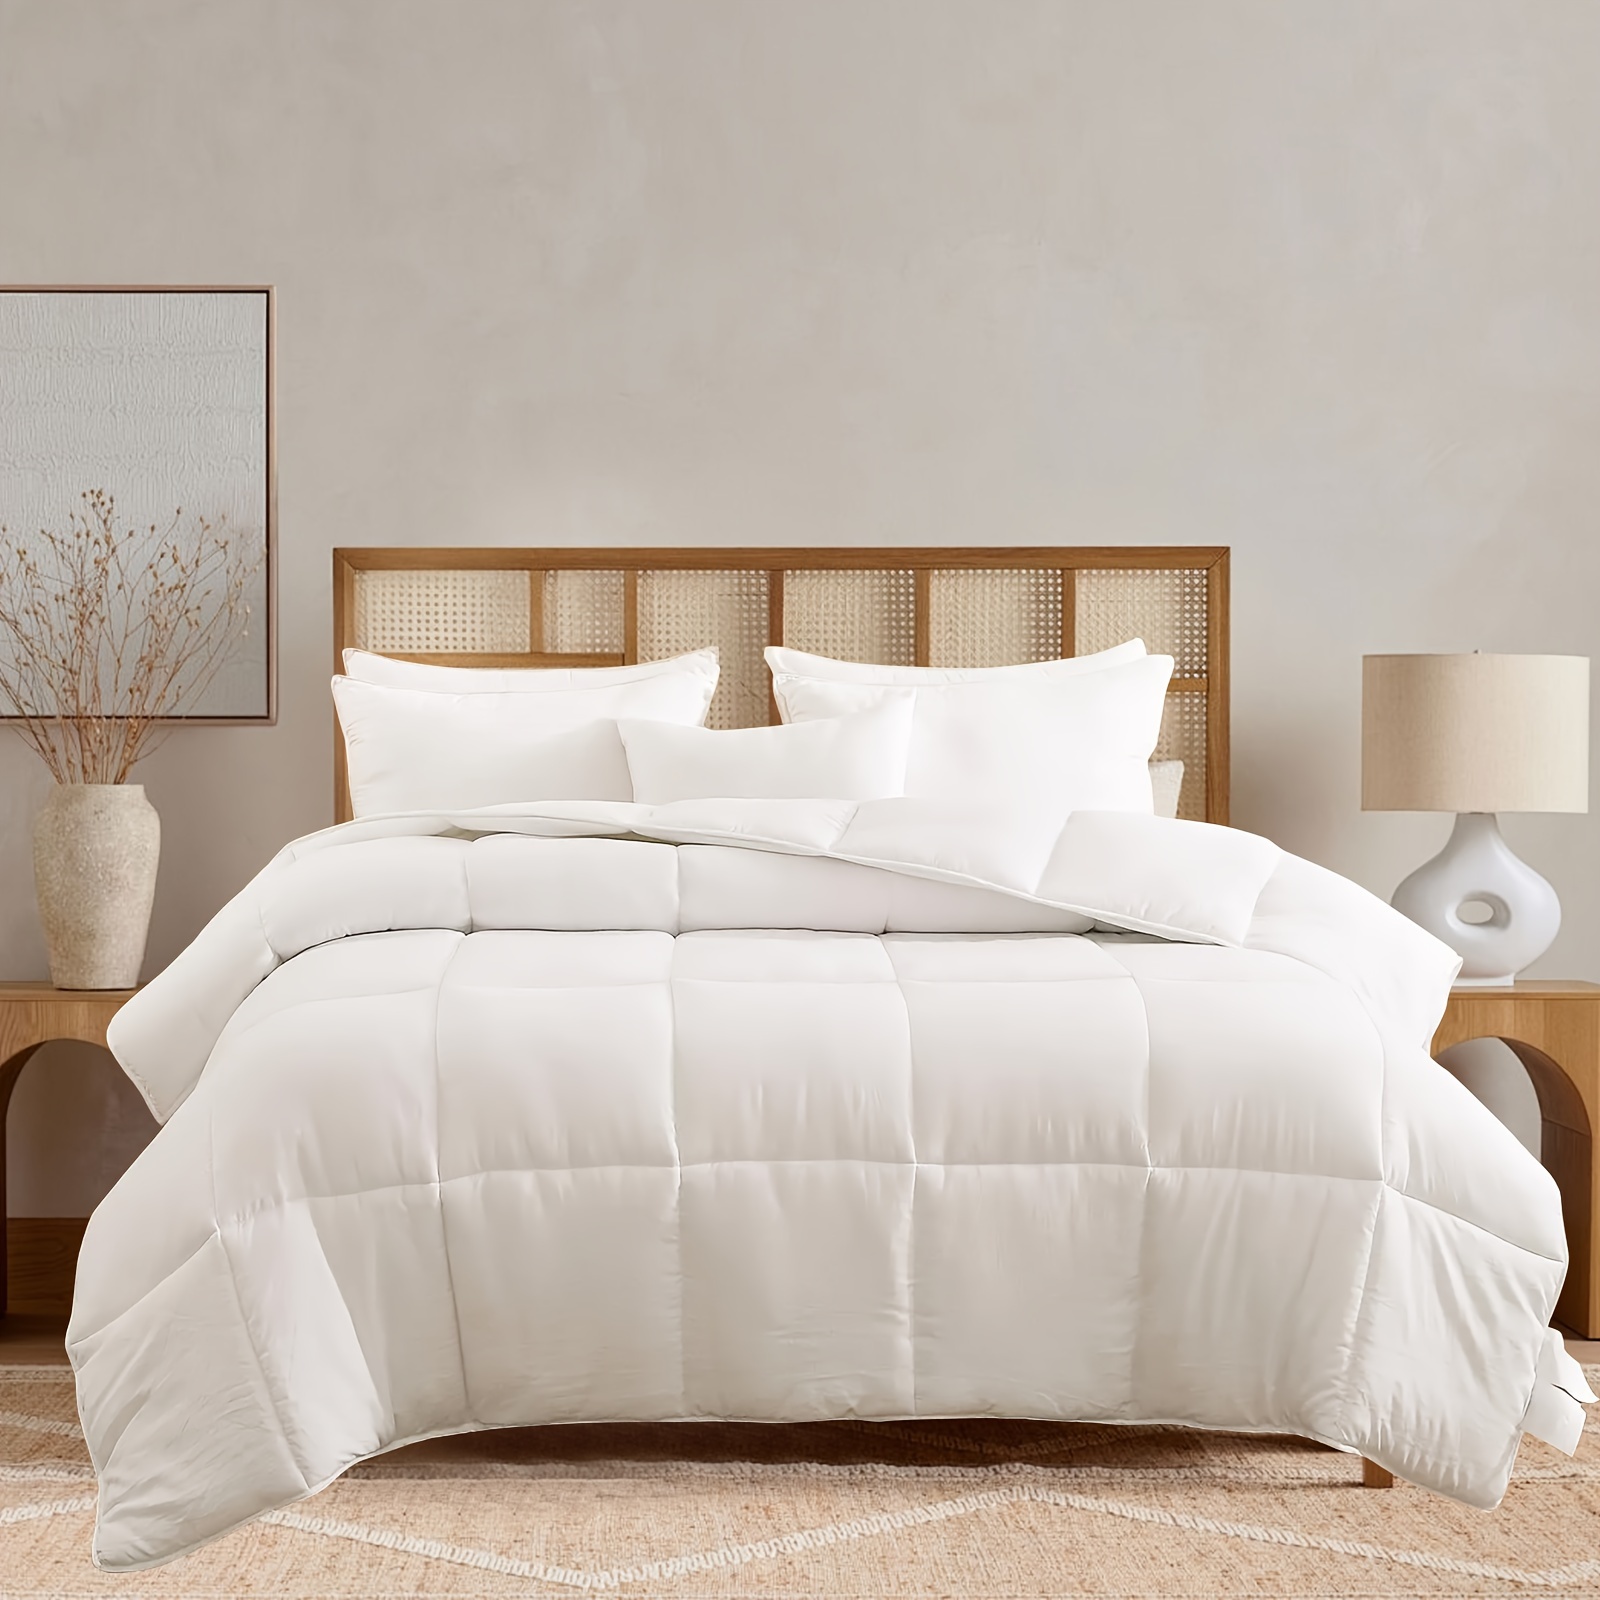 

3 Geese Soft Hotel Comforter - White Colors - Goose Down Alternative - Box Stitched - Premium 1800 Series - All Season Warmth - Quilted Bedding Comforter With Corner Tabs